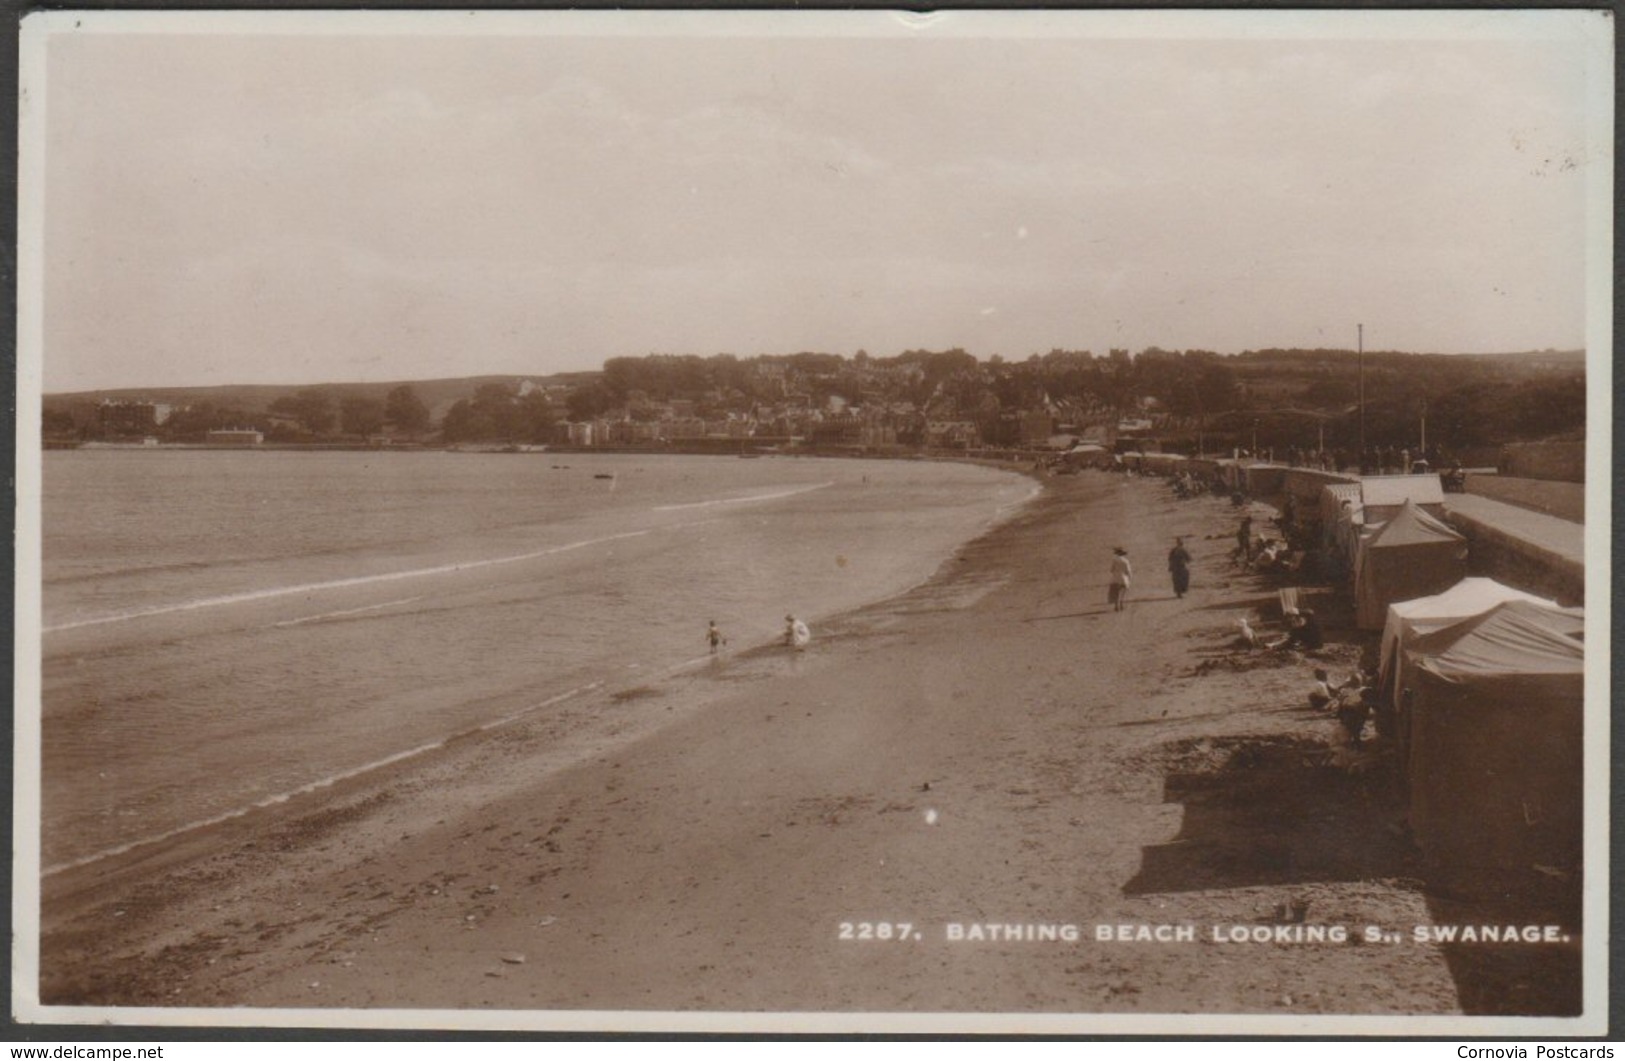 Bathing Beach Looking South, Swanage, Dorset, C.1930s - Sweetman RP Postcard - Swanage